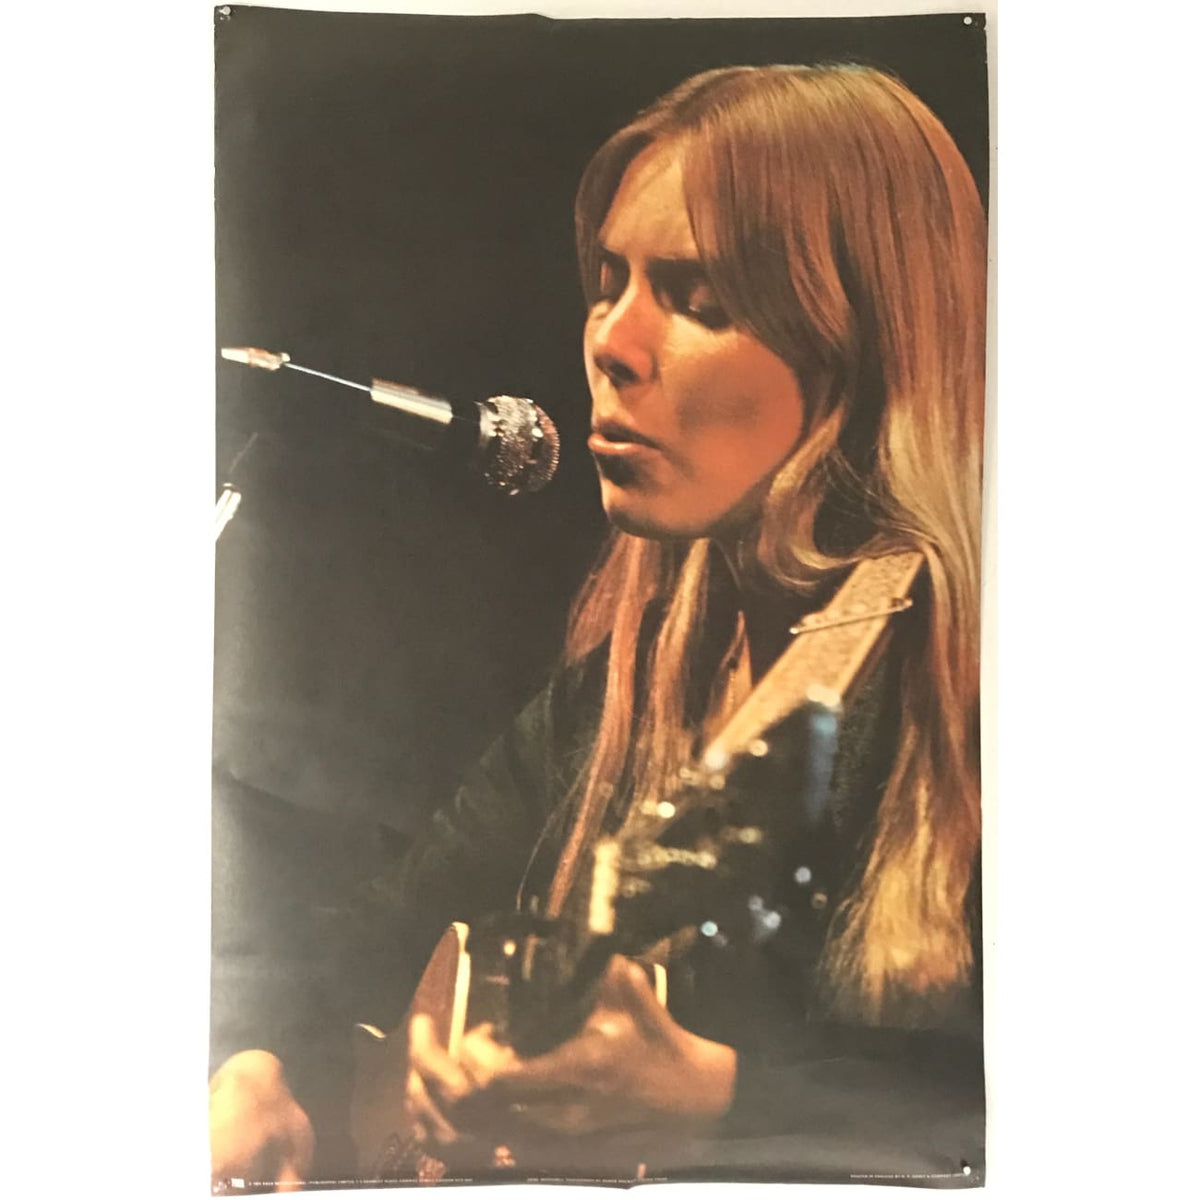 Joni Mitchell, Painting With Words And Music Warners Lot / L.A., Music, VHS  – Golden Class Movies LTD